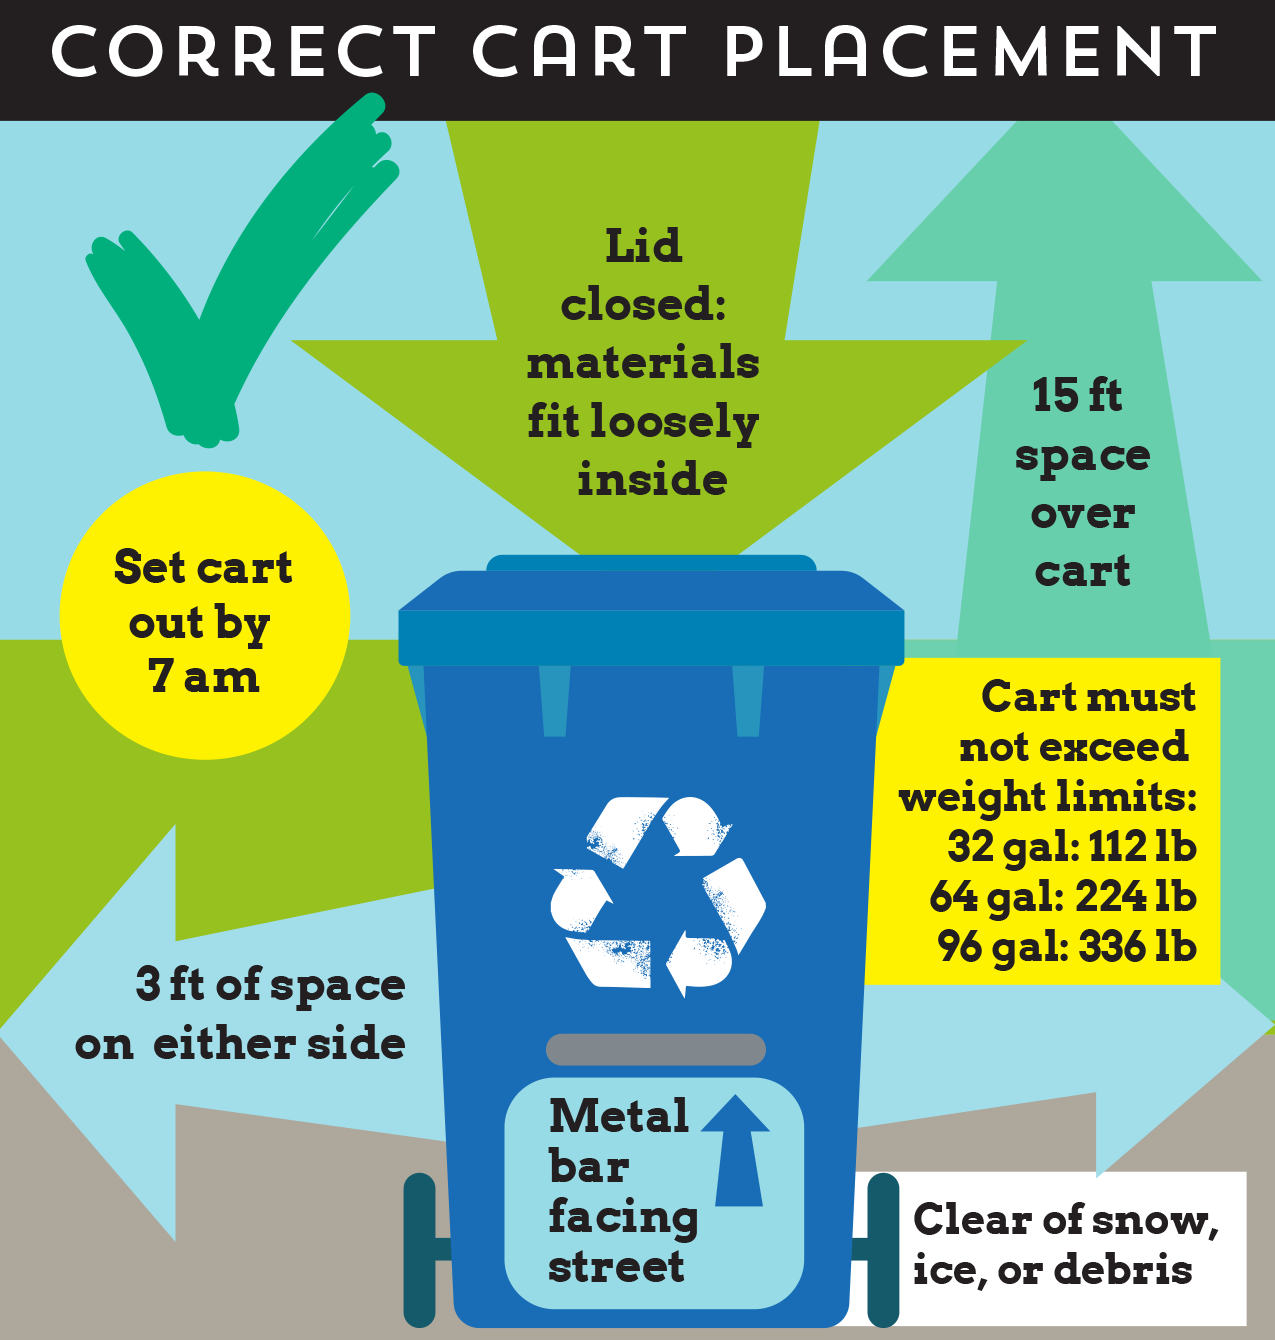 Reminder: Choose Your Waste & Recycling Cart Sizes by Sept 10